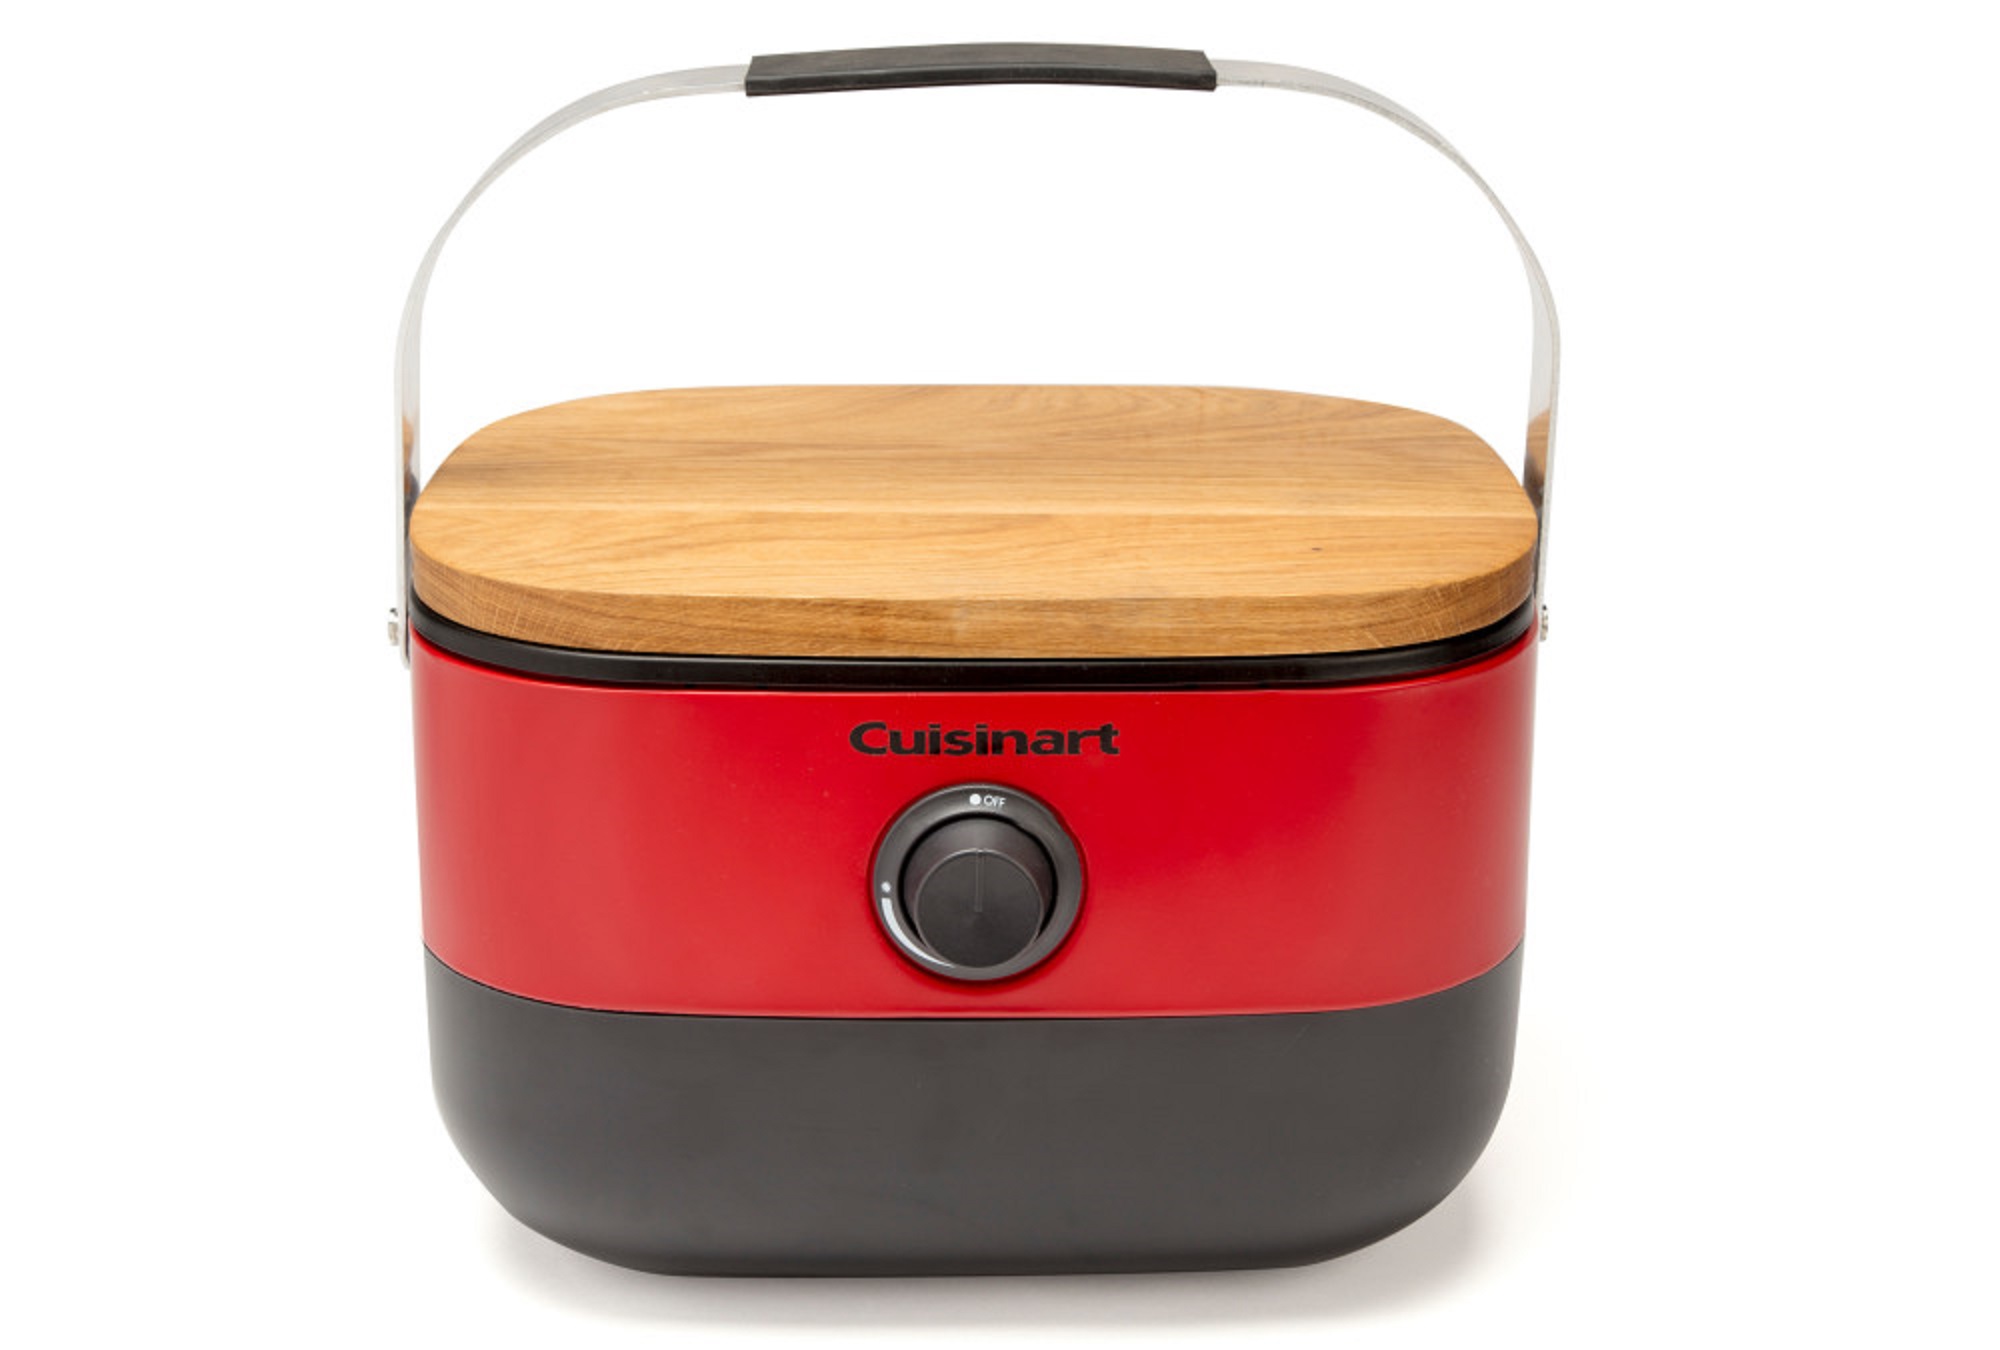 Angle View: Cuisinart - Venture™ Portable Gas Grill - Red/Black/Wood